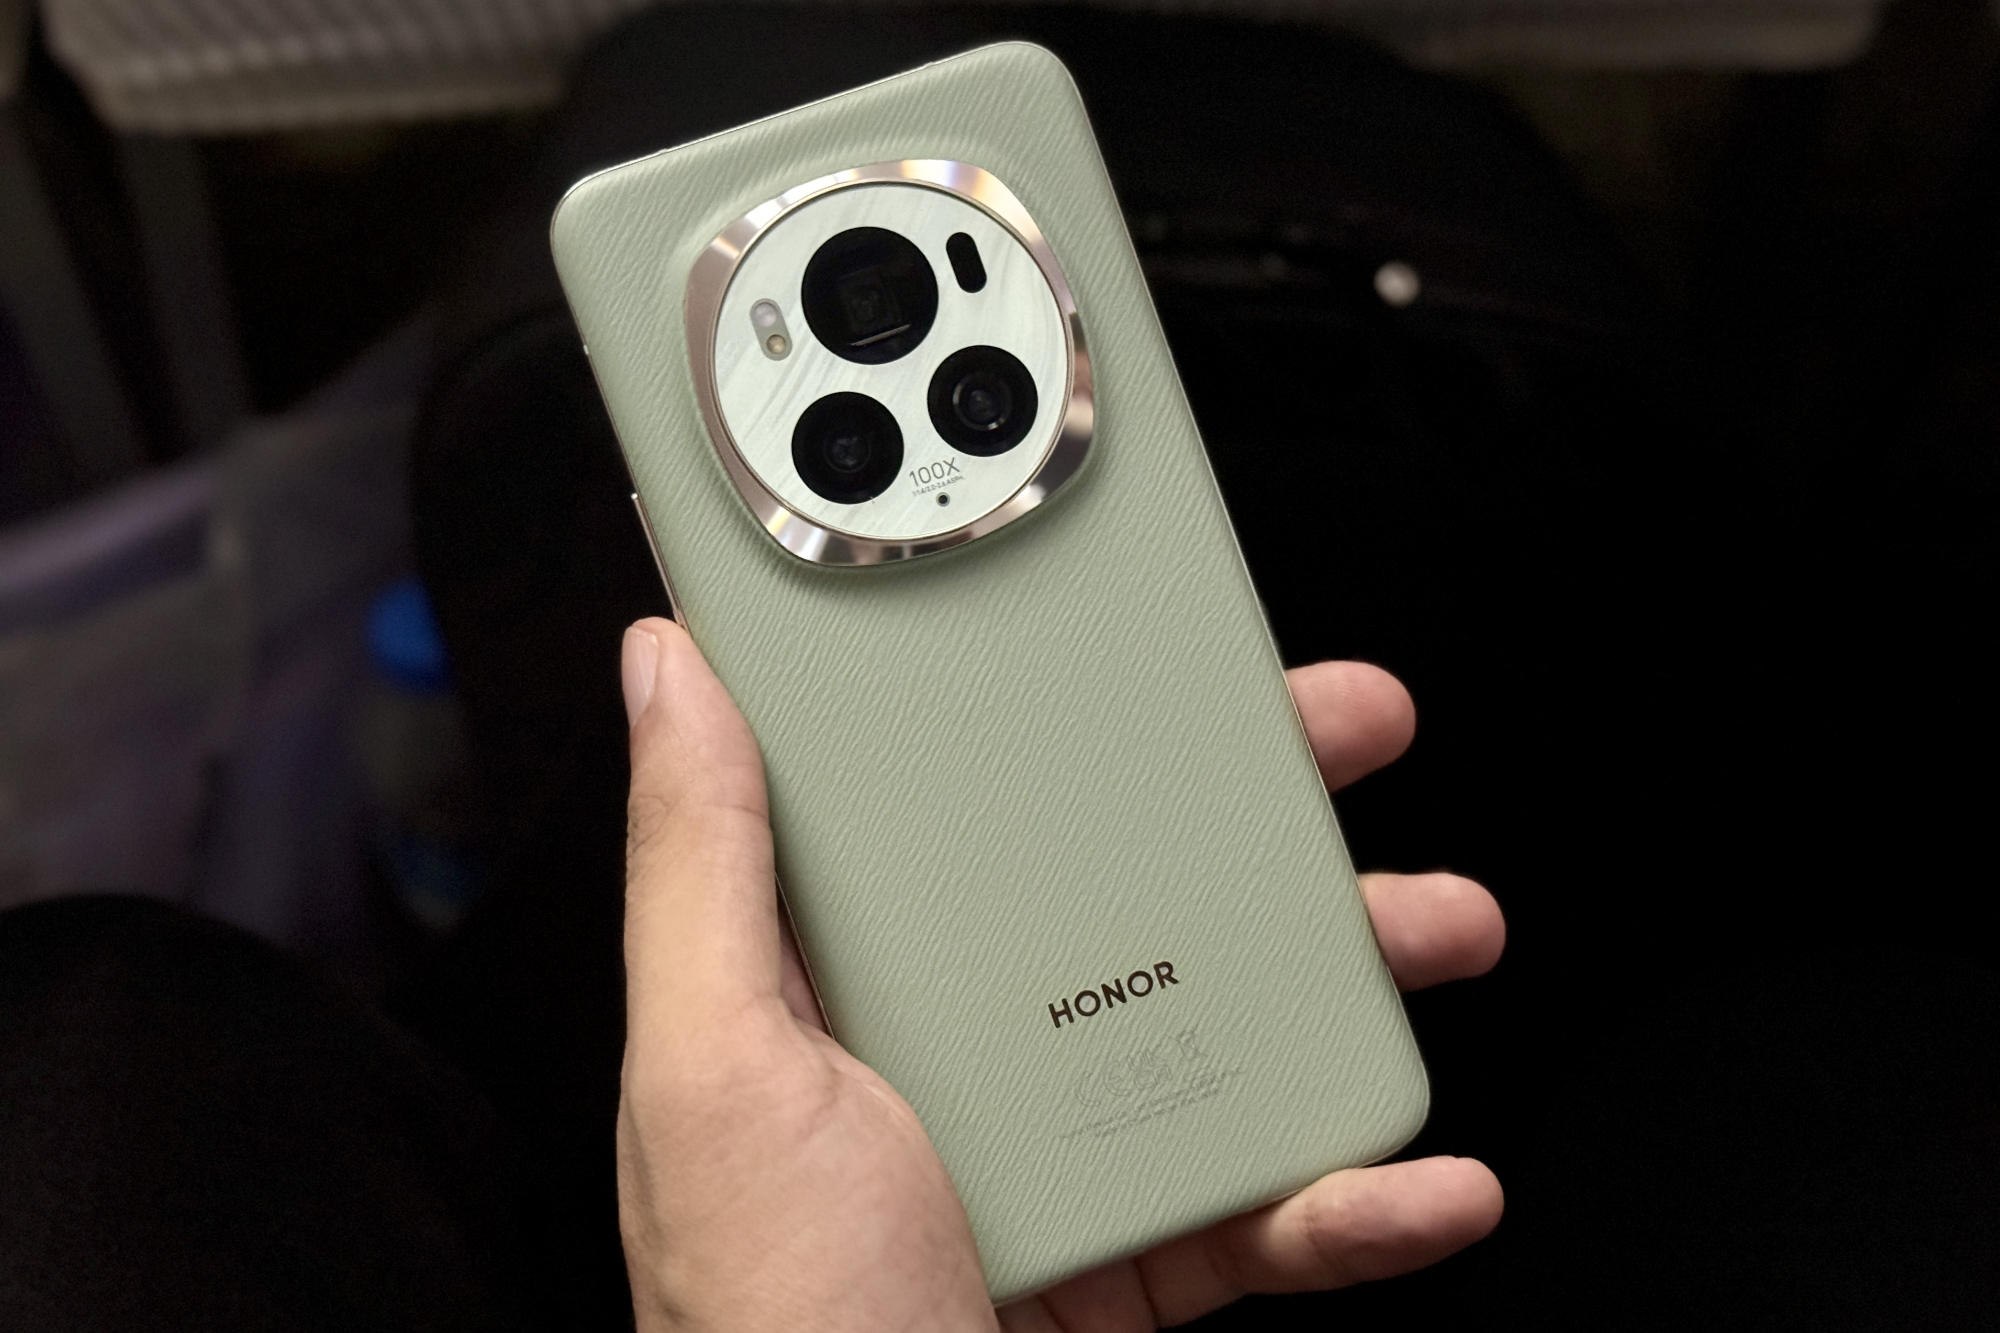 Someone holding the Honor Magic 6 Pro, showing the back of the phone.